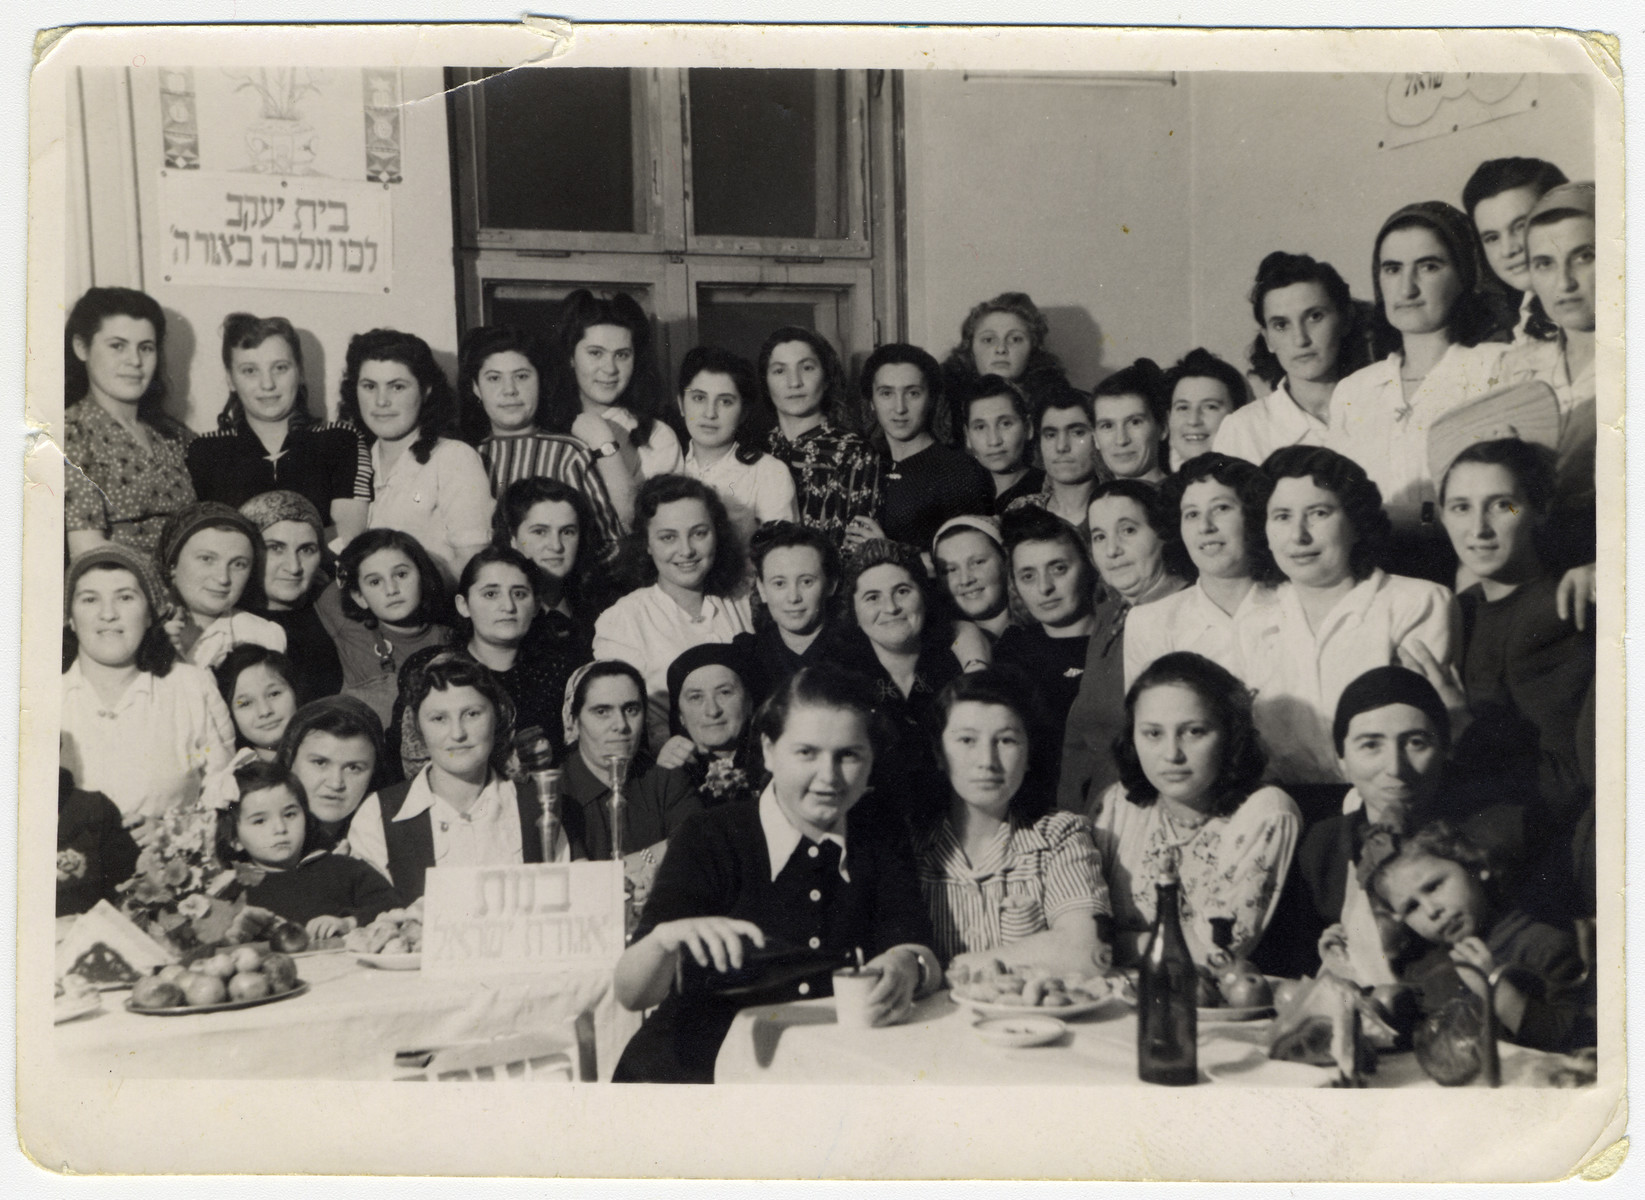 Girls from Bnot Agudat Yisrael and Beit Yaakov hold a celebration in the Bad Gastein displaced persons camp.

Pictured are Esther Ass second from the right first row.  Her sister Itka is pictured in the middle of the middle row in a light colored blouse. Also pictured is Hinde Goldberg (fifth from the right, middle row) and to her right is Yente Gelkop, and Chava Joskovitch.  Lola Schwartz nee Fried, is in the back center, with her shadow on the wall. Her sister, Magda (Matel) Gruen nee Fried,  is in the second row left, right under the woman in the printed dress.